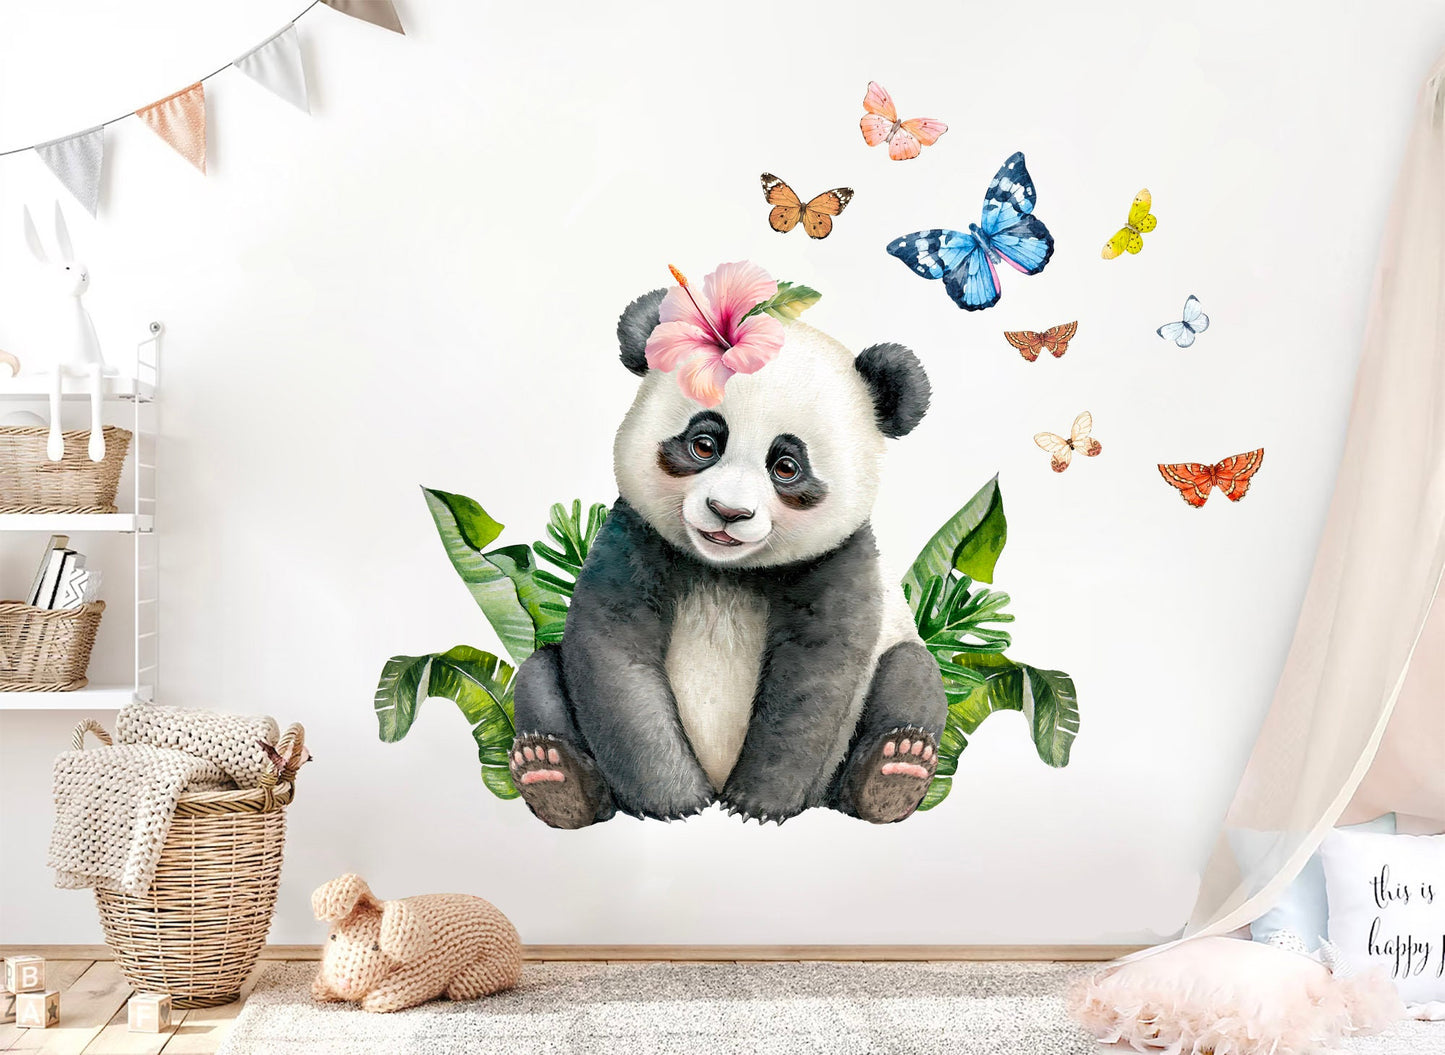 Floral Crown Panda Jungle Wall Decal - Adorable Butterfly Decor - BR357